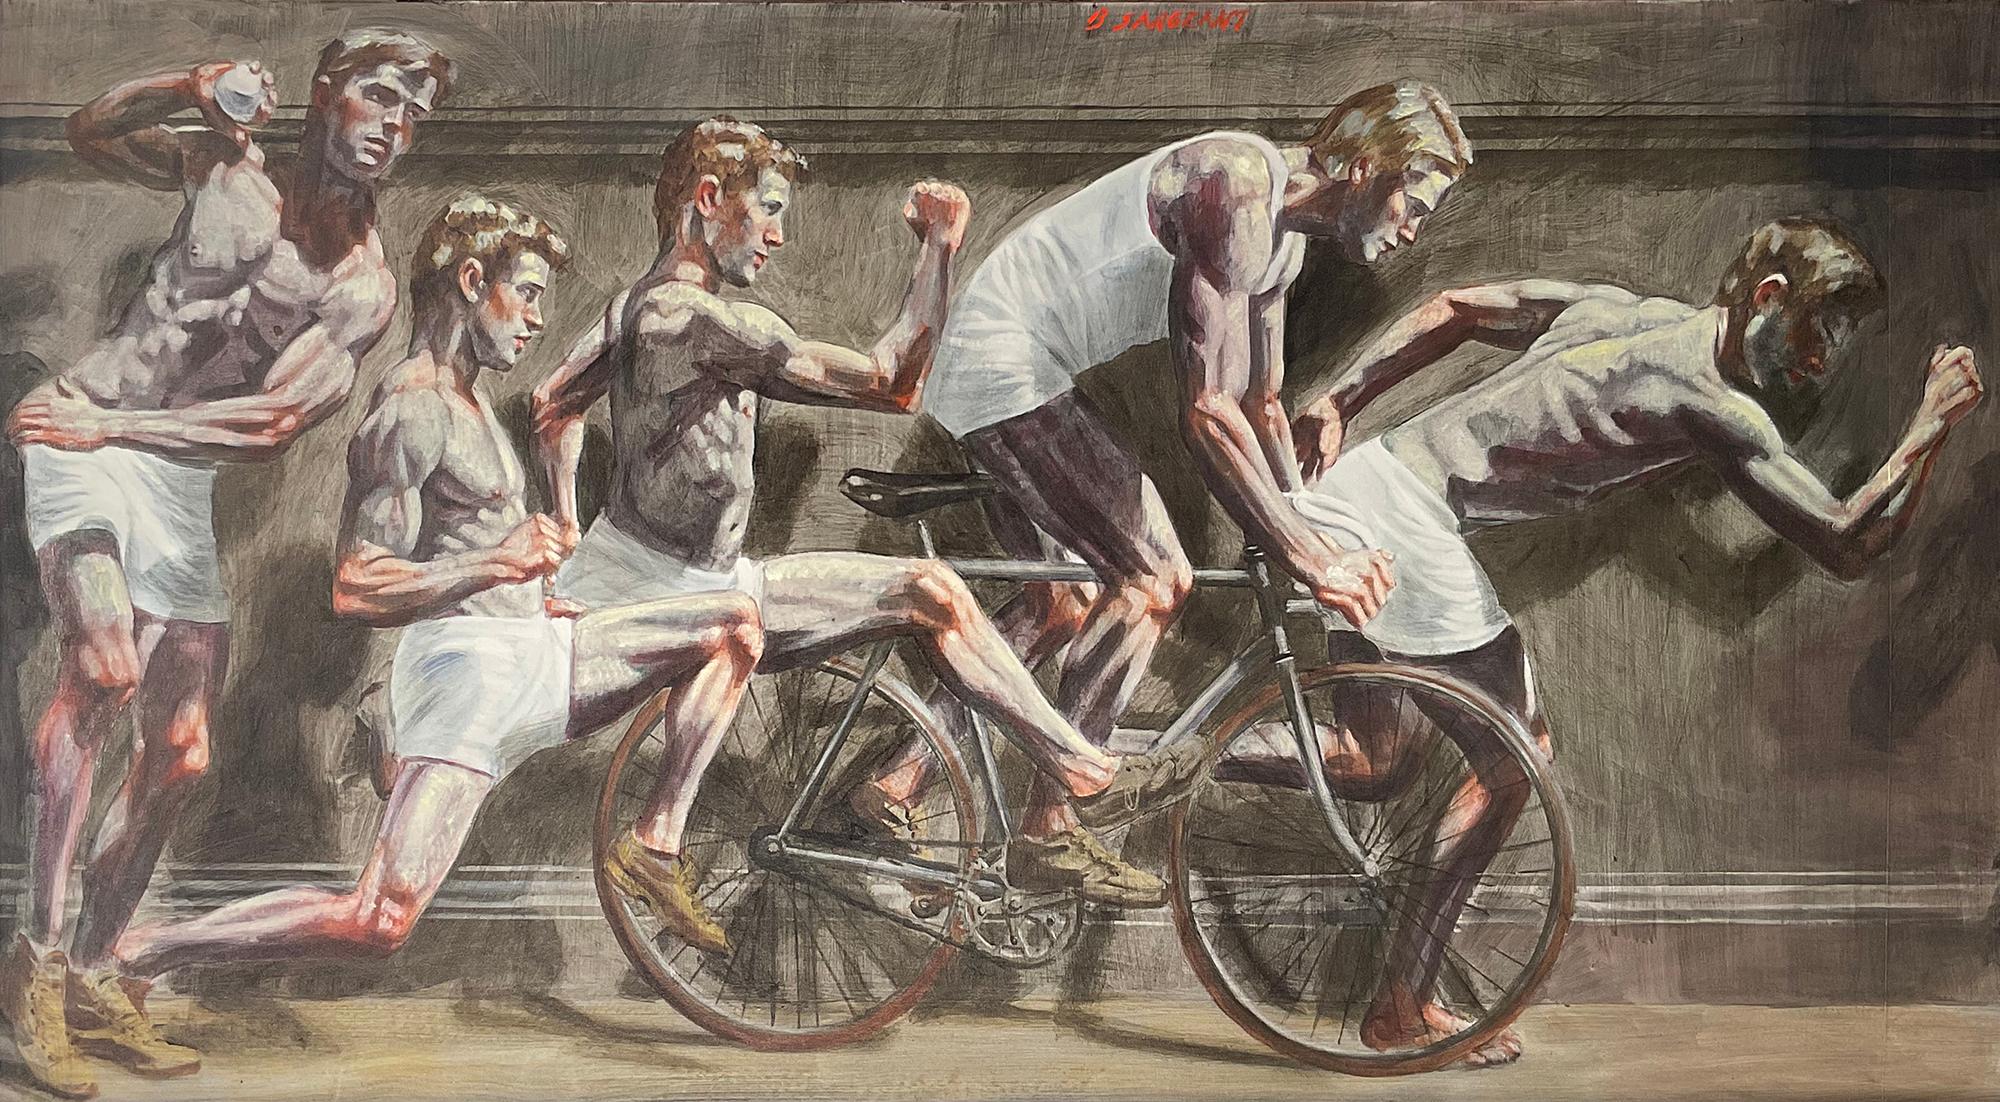 Frieze with Five Athletes (Mural of Young Men Running in Shorts by Mark Beard)